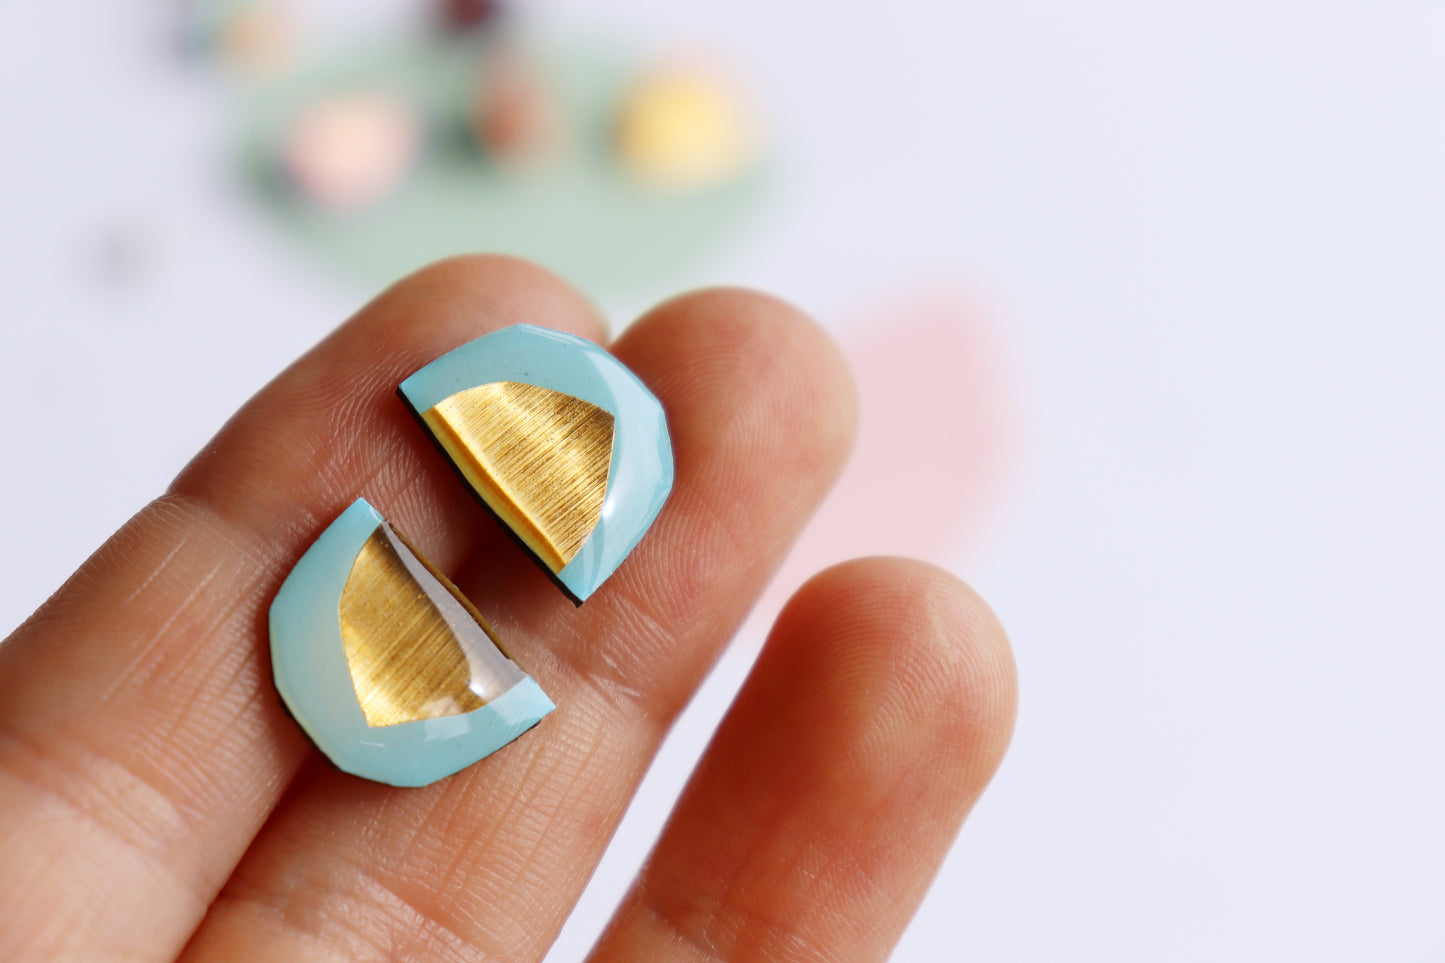 eco chic resin stud earrings in light blue and gold / upcycled vinyl record